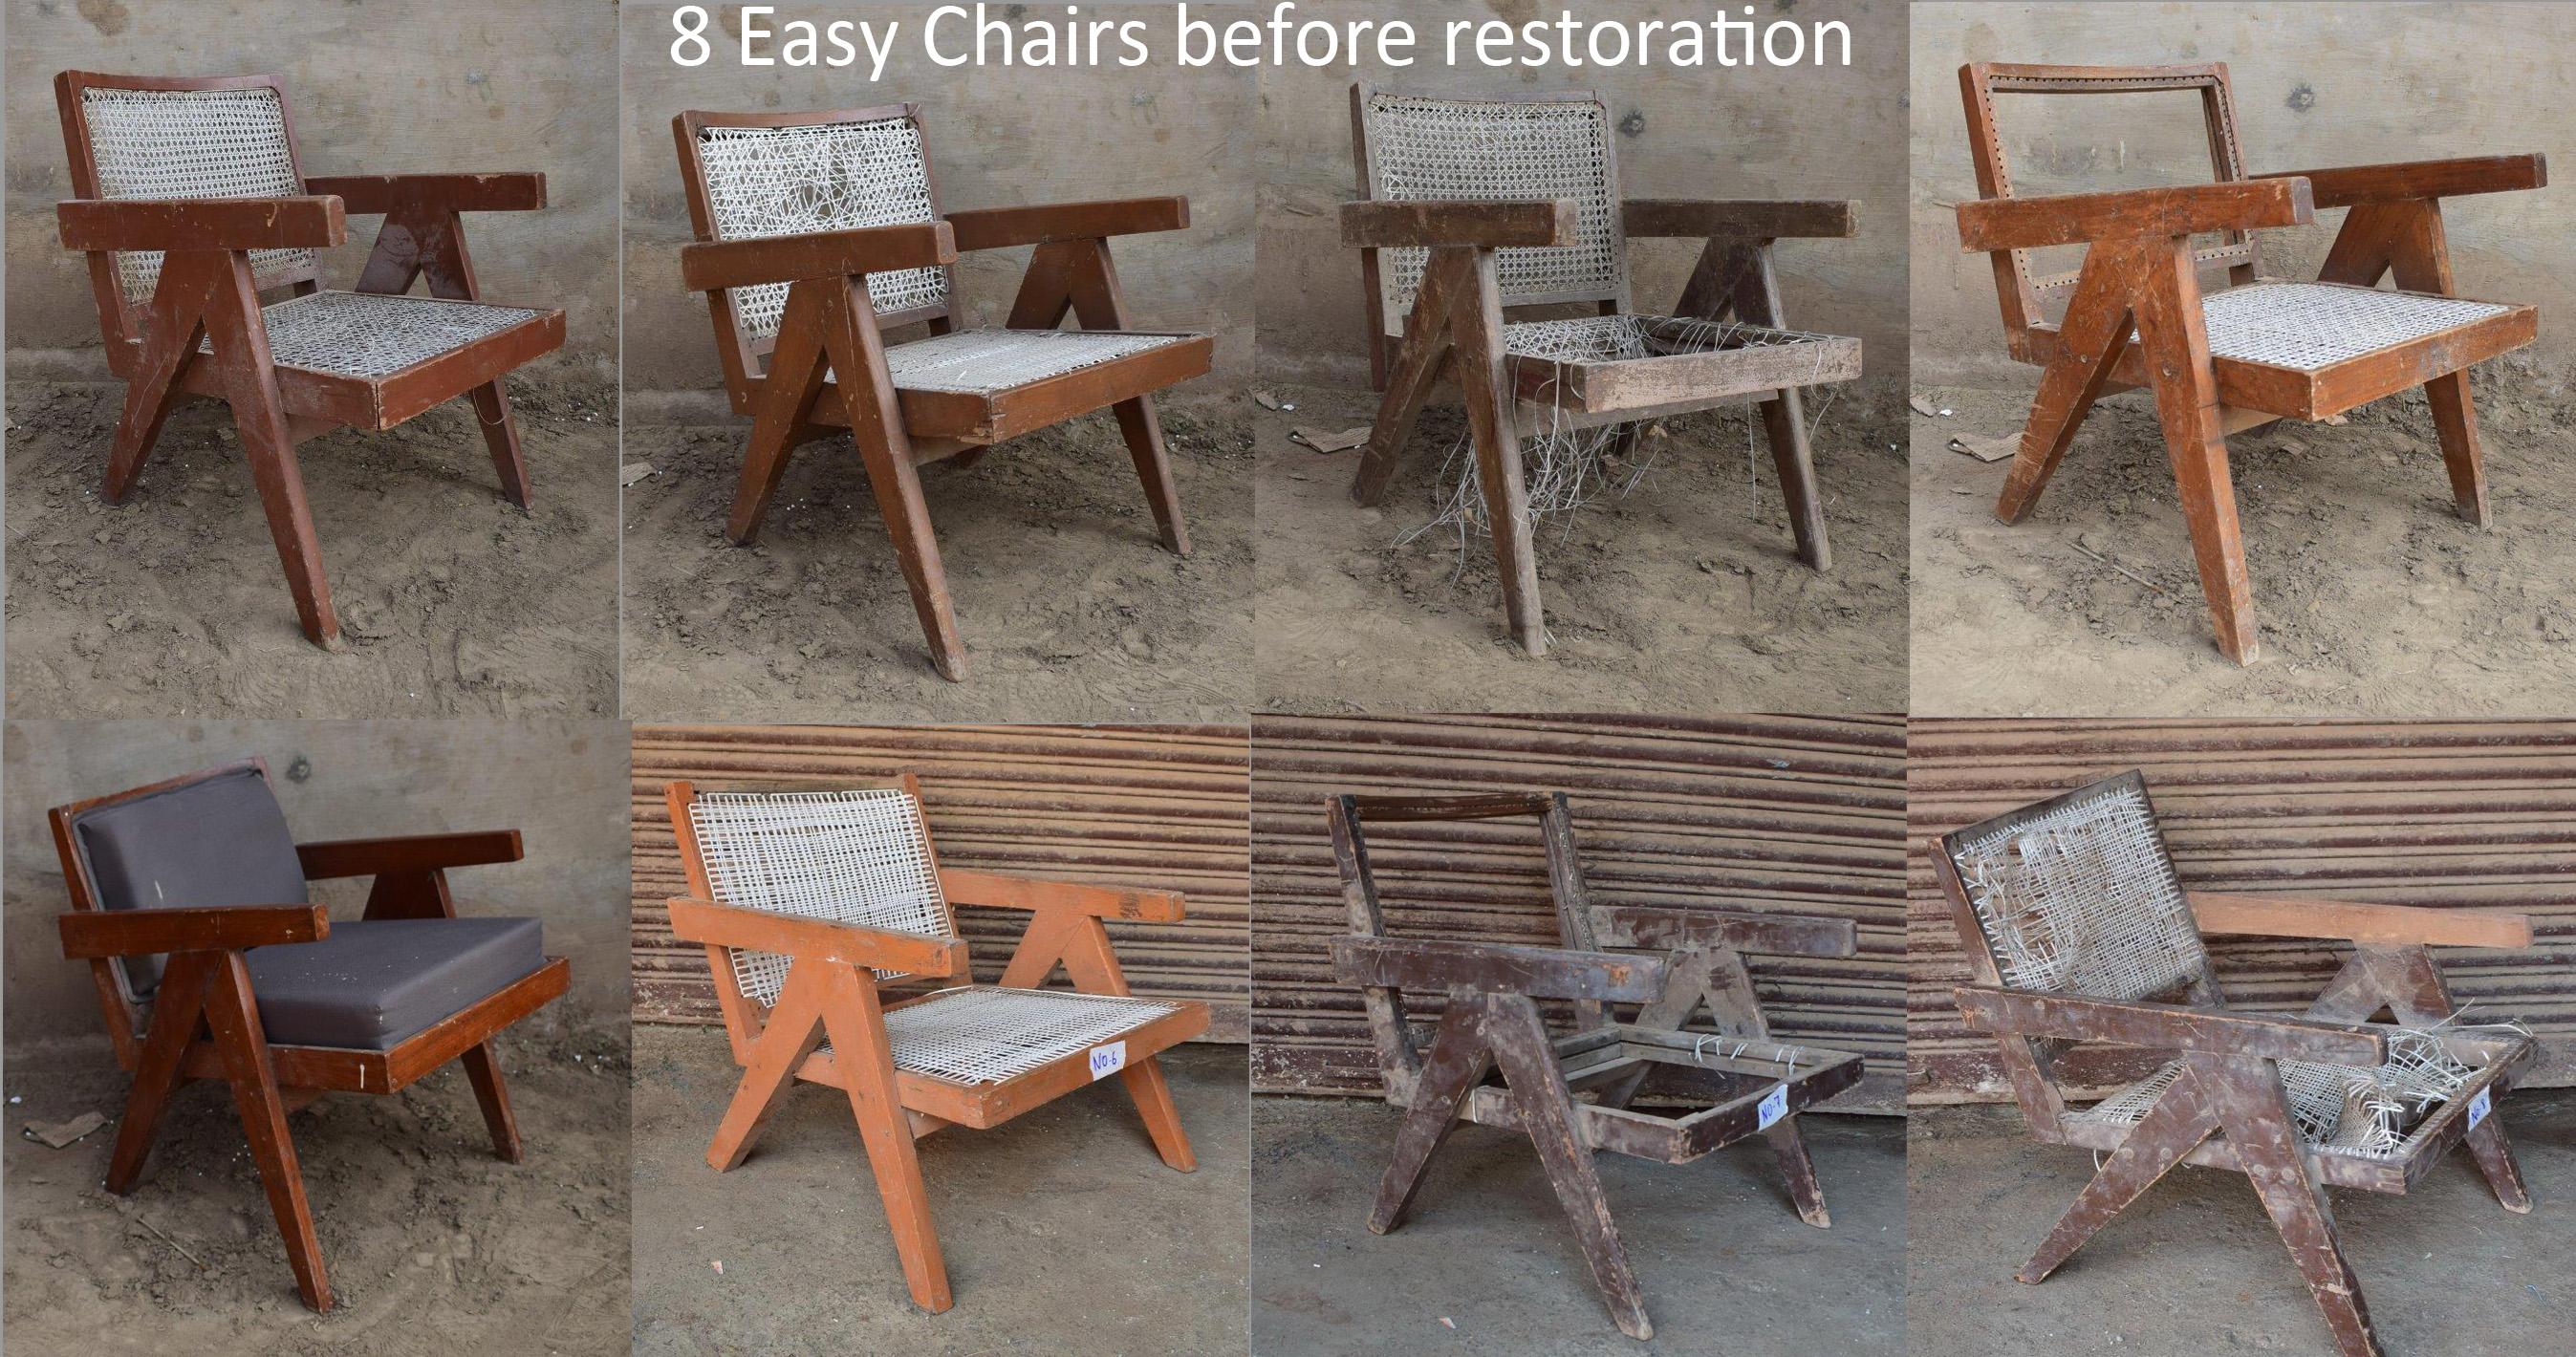 Pierre Jeanneret, Exceptional set of 8 'Easy Armchairs' with original Lettering from an Administrative building in Chandigarh, India. 

6 Armchairs have their original lettering (see photos). I sold pairs of these Armchairs without lettering in